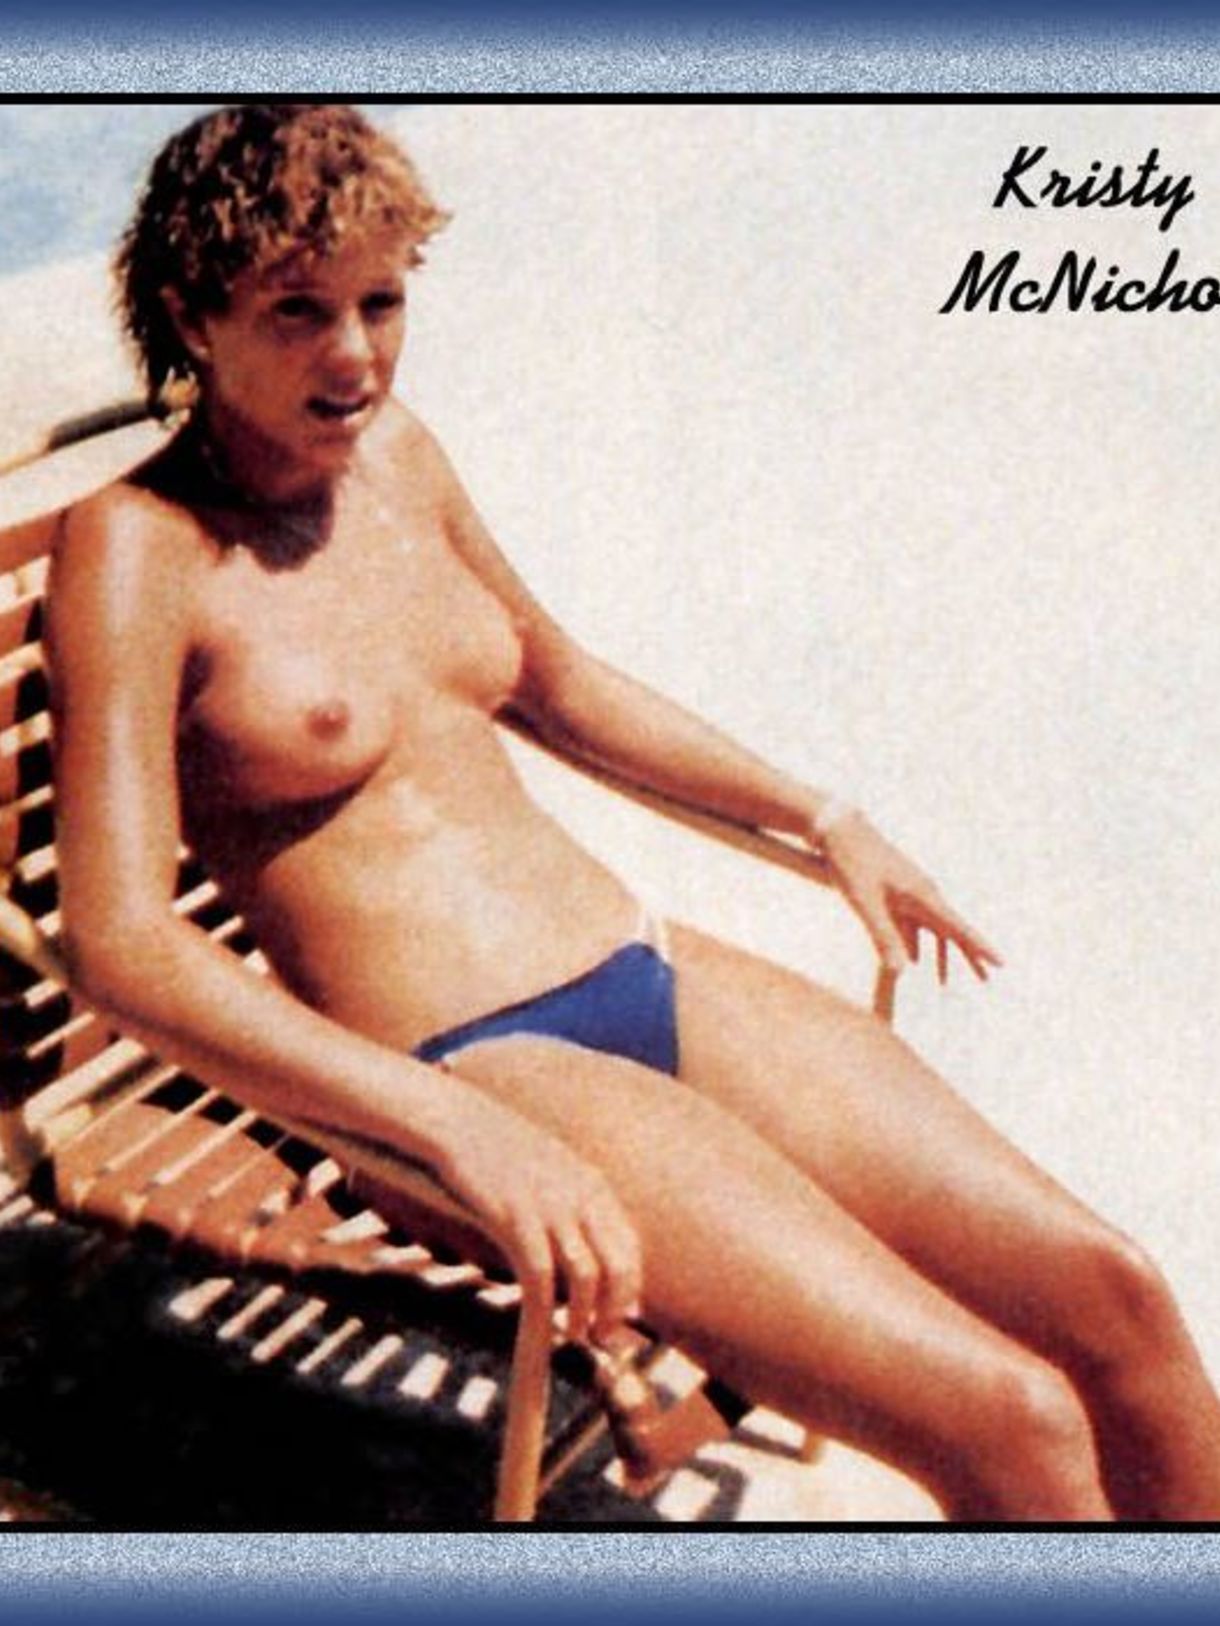 Pictures kristy mcnichol